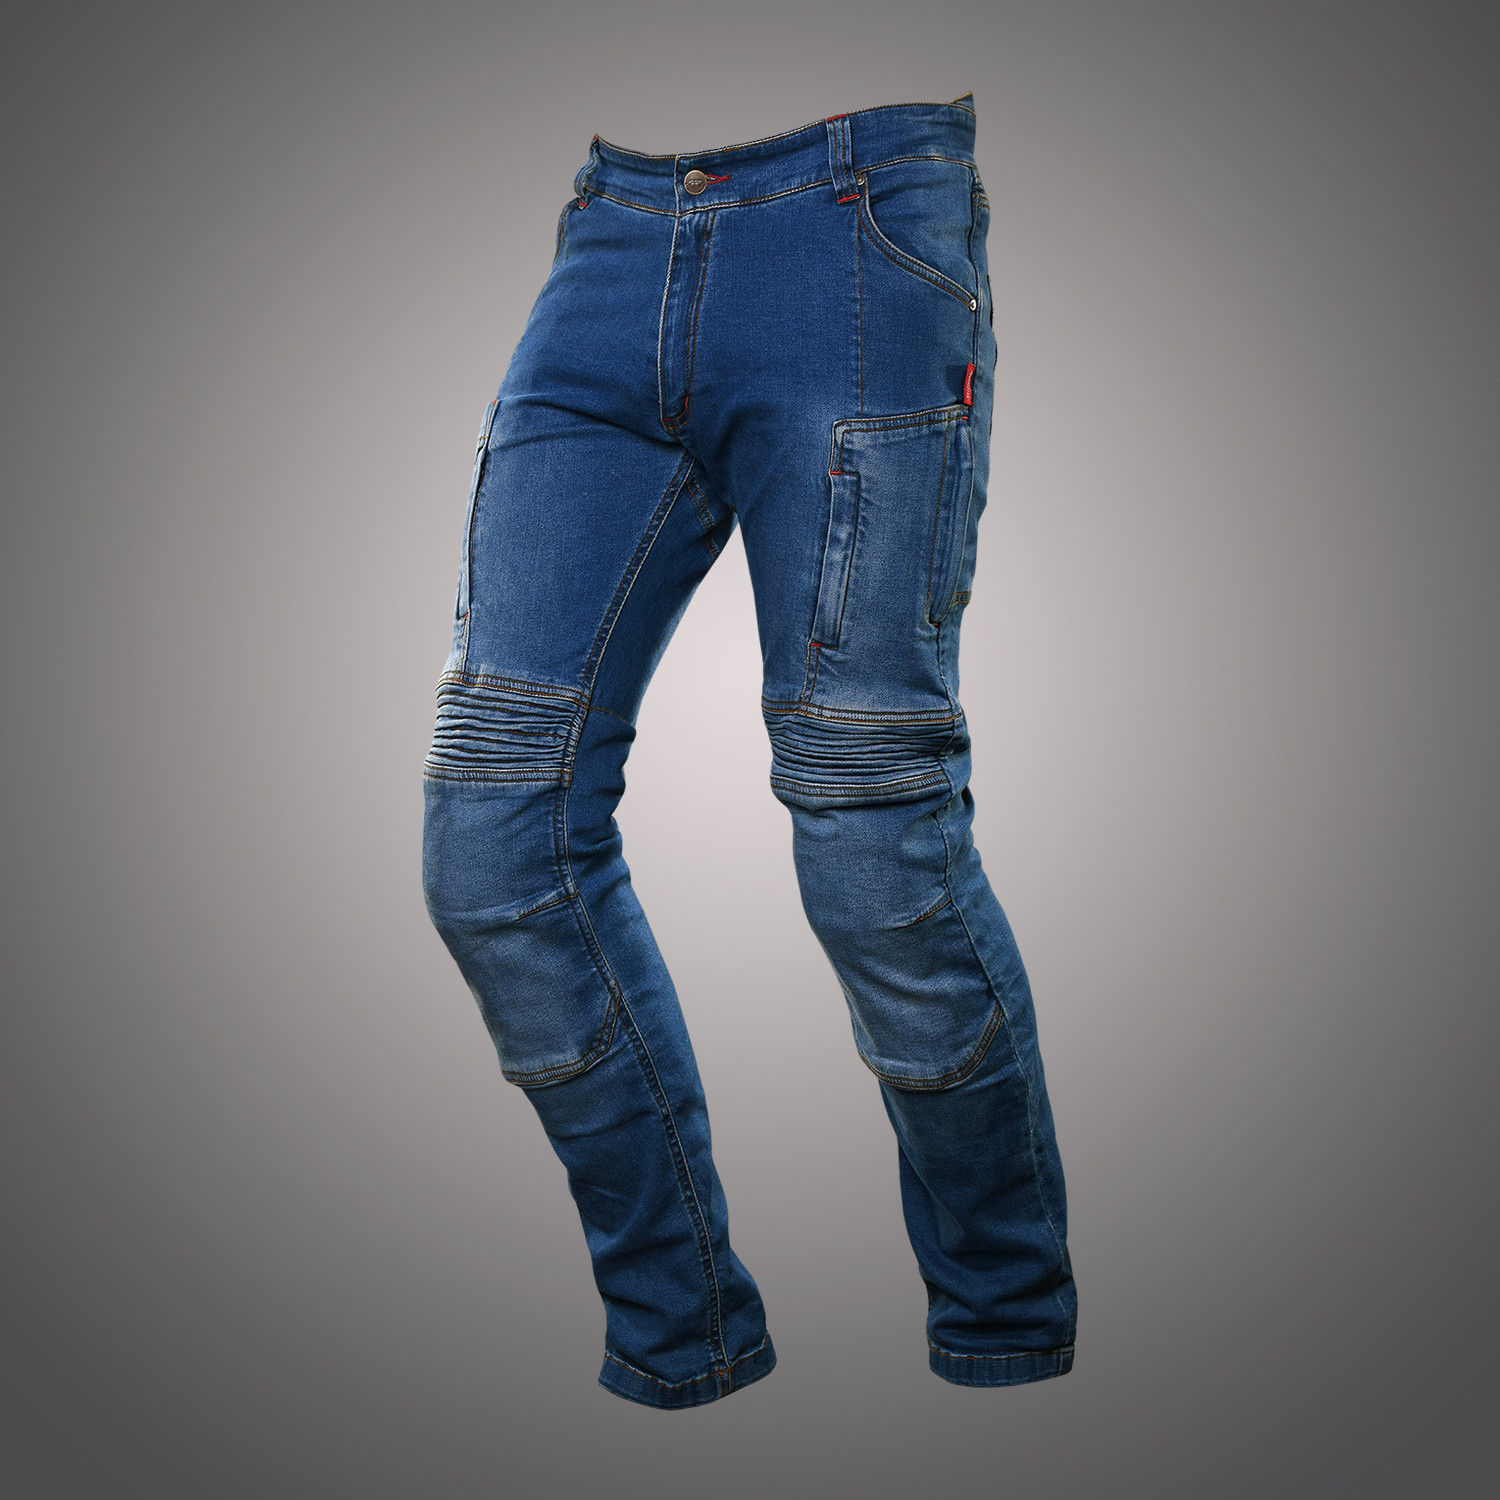 Why you shouldnt buy a pair of Kevlar motorycle jeans